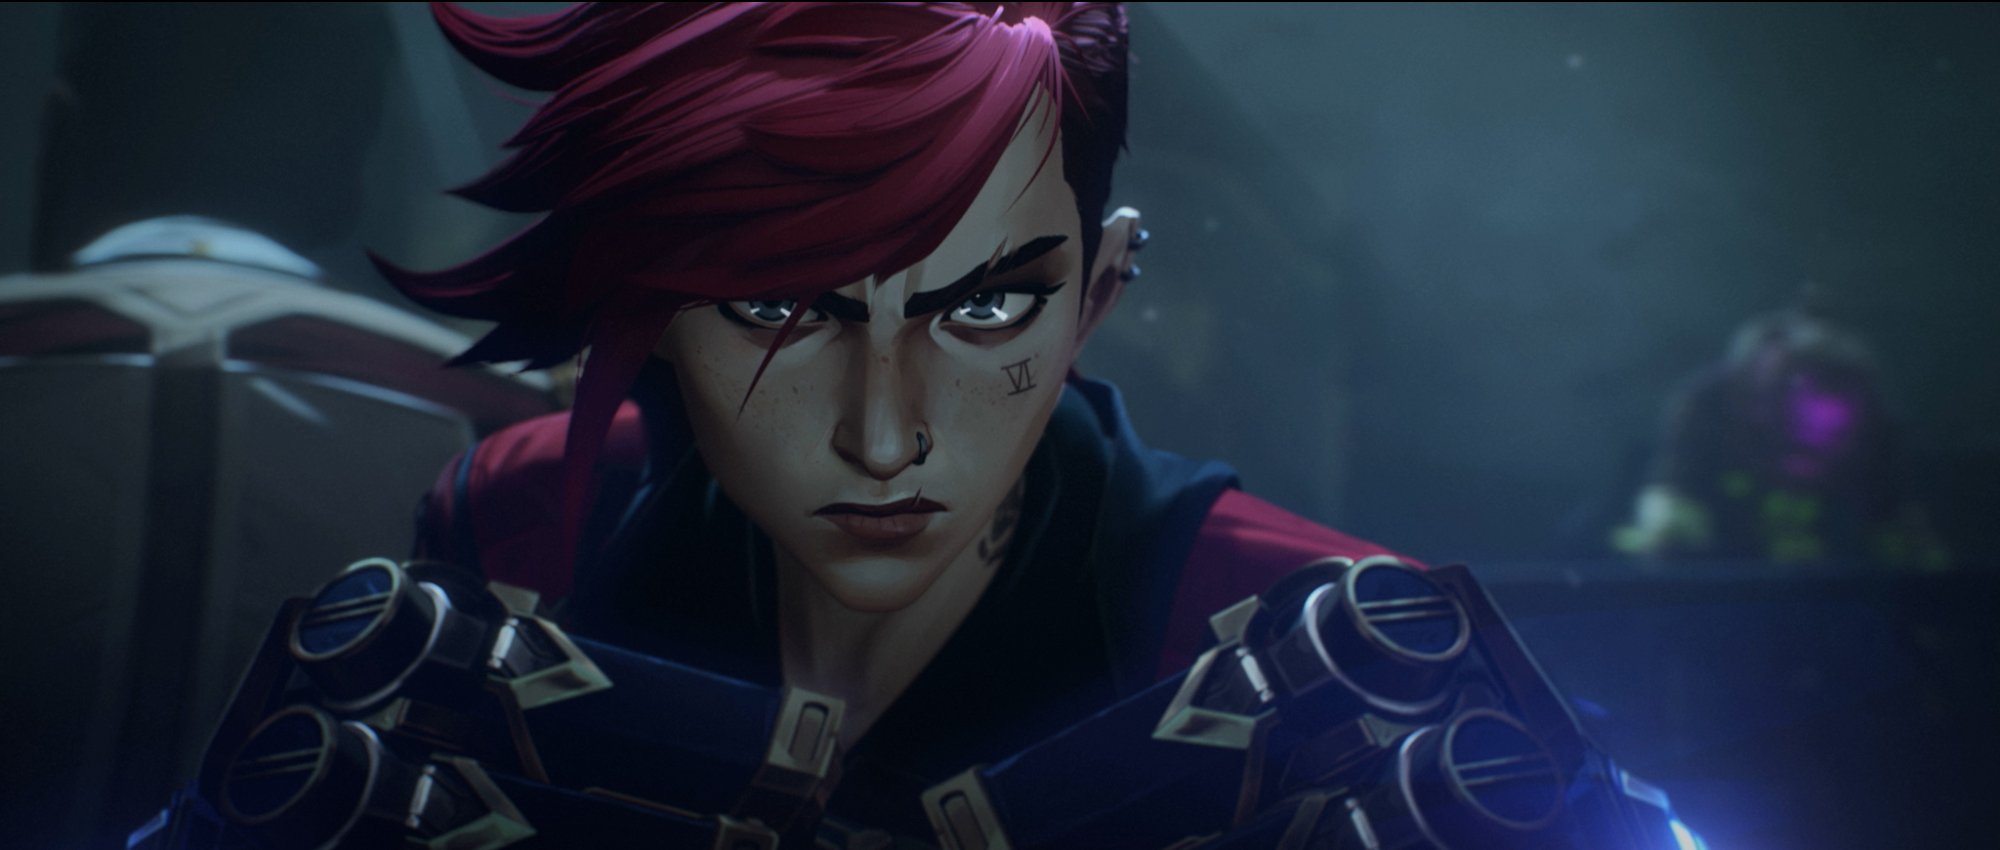 Vi holding up her fists in 'League of Legends' show 'Arcane' as the featured image about if Vi and Caitlyn are LGBTQ